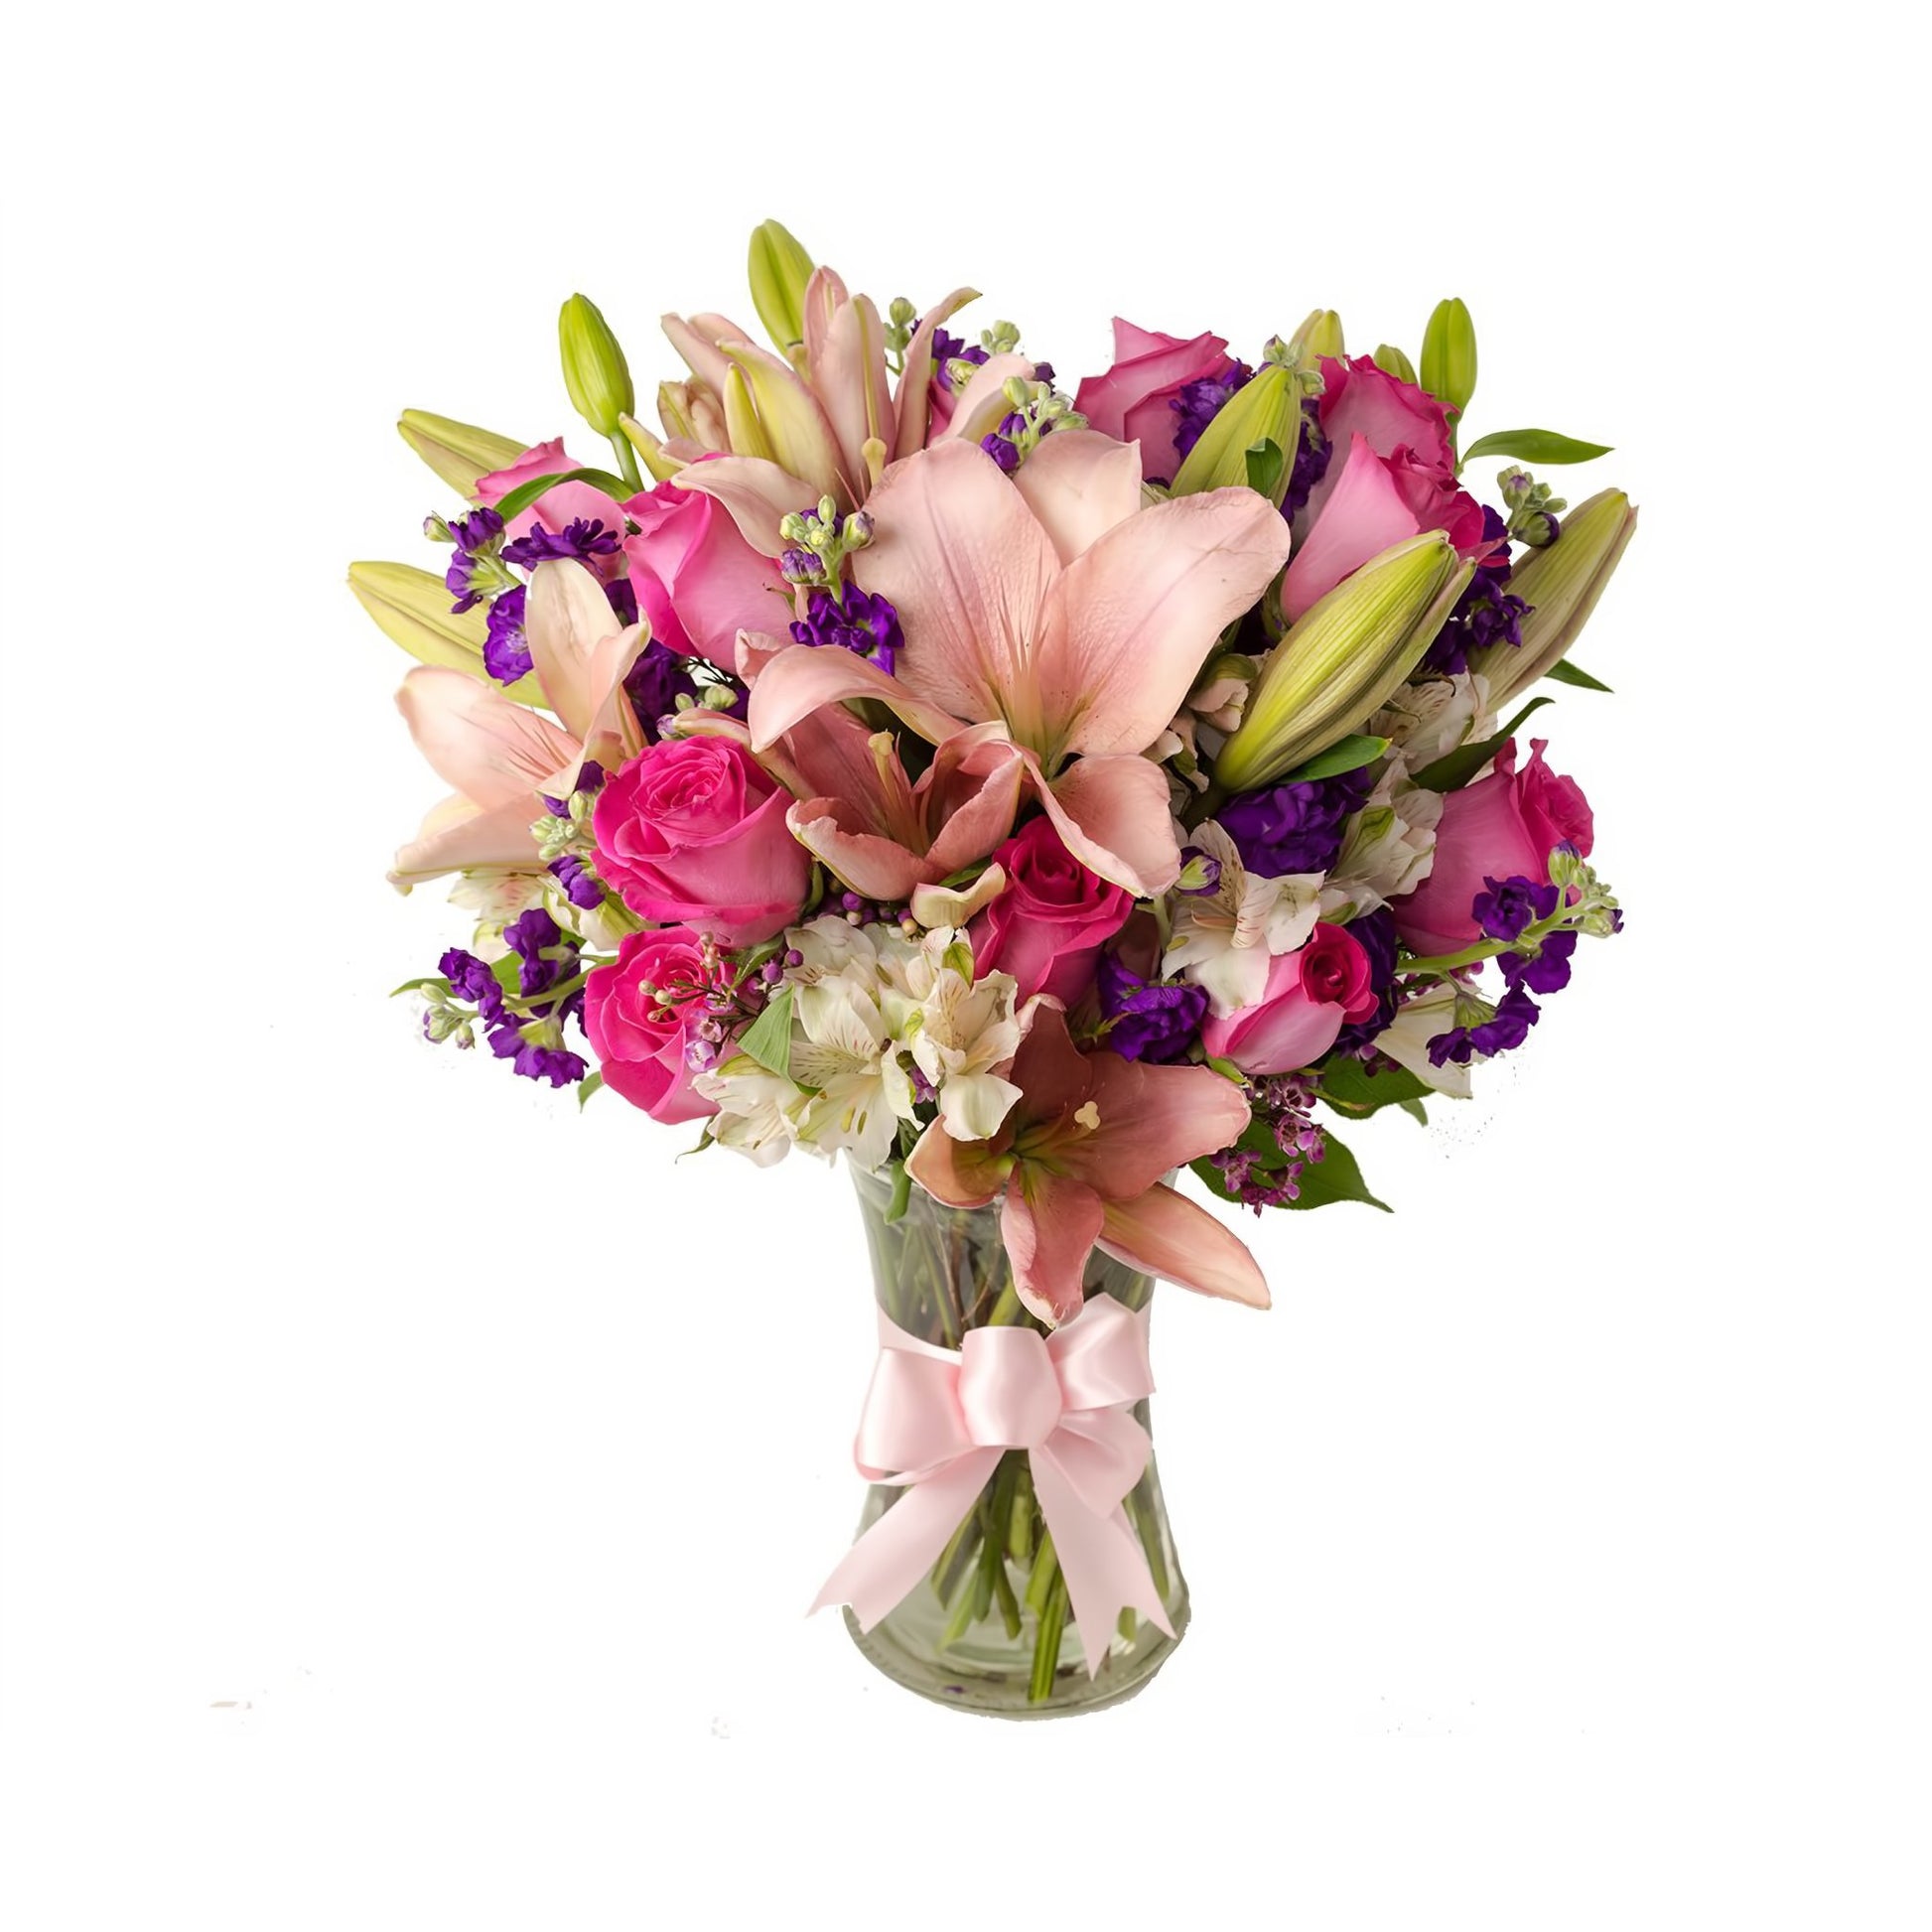 Sweetheart Lovely - Occasions > Anniversary - Queens Flower Delivery